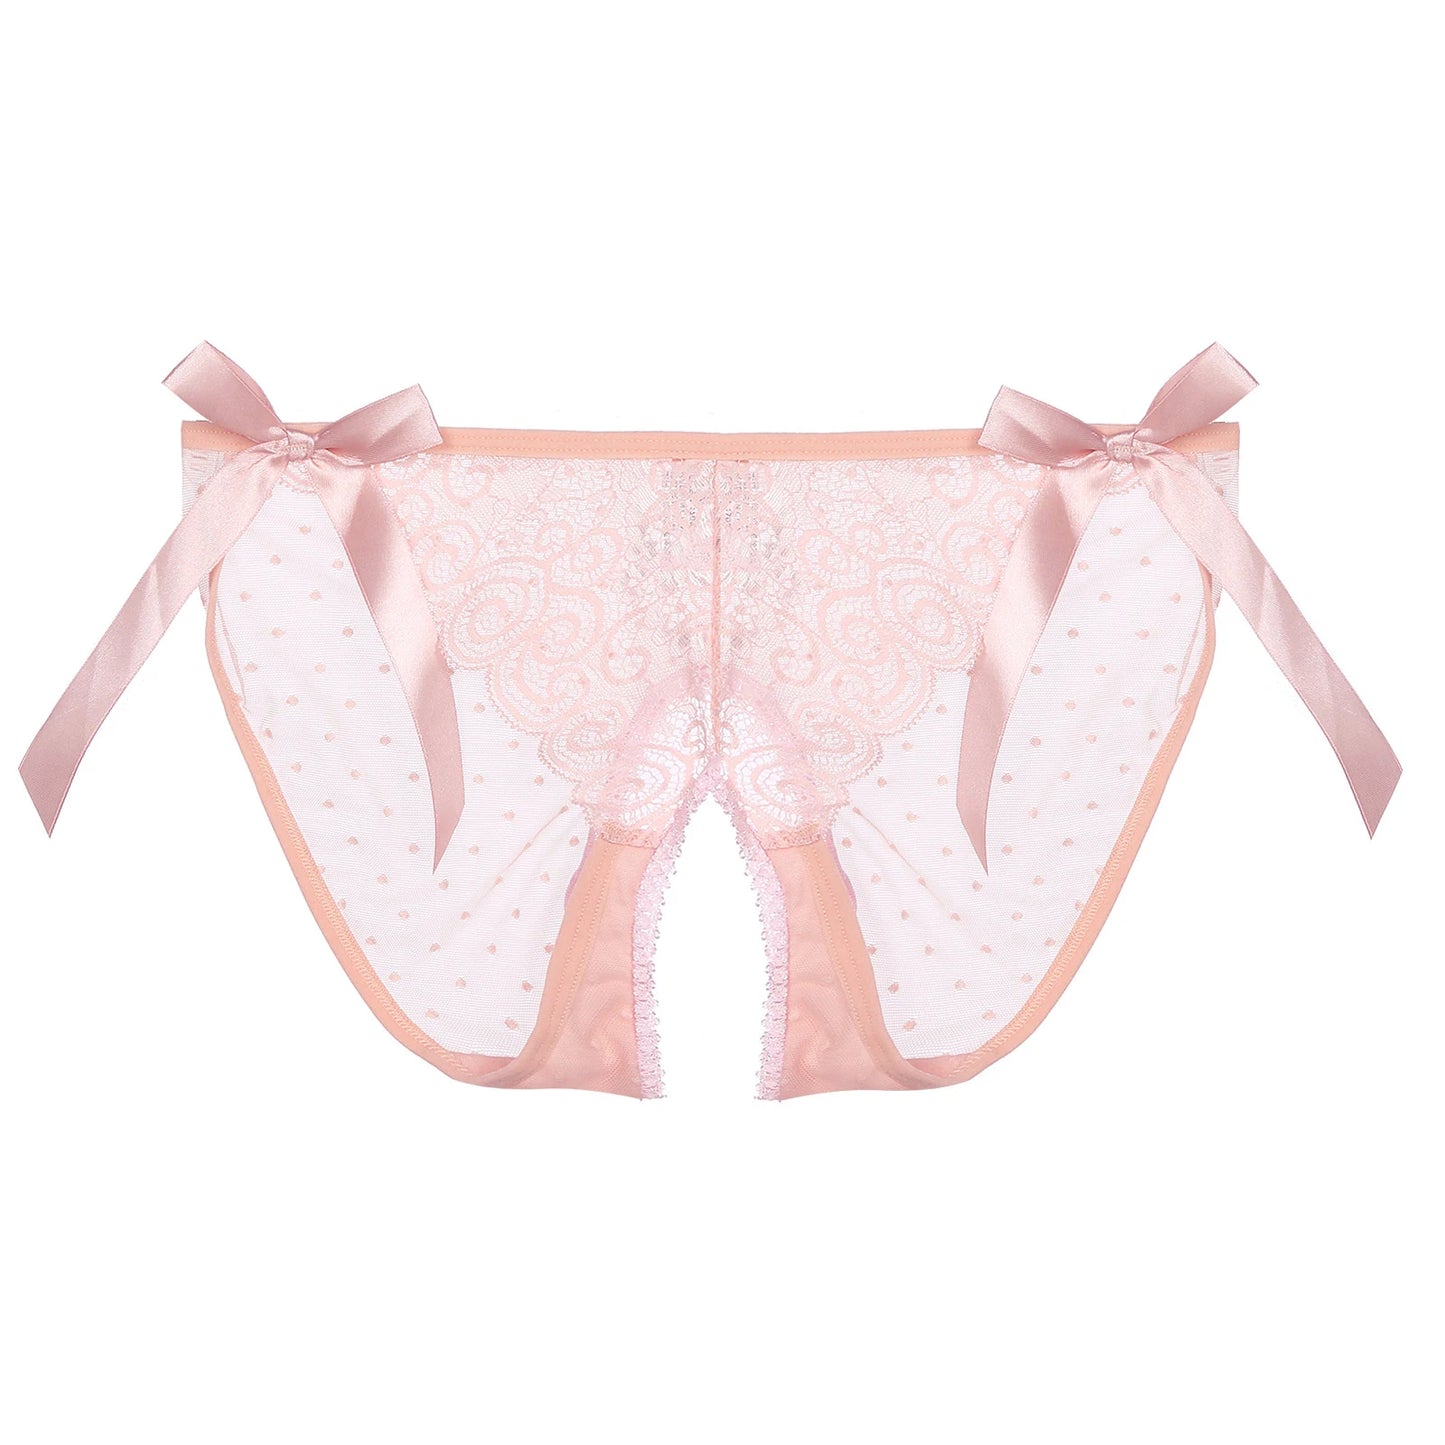 Sissy Panties See-Through Mesh Briefs Underwear  Low Rise Crotchless